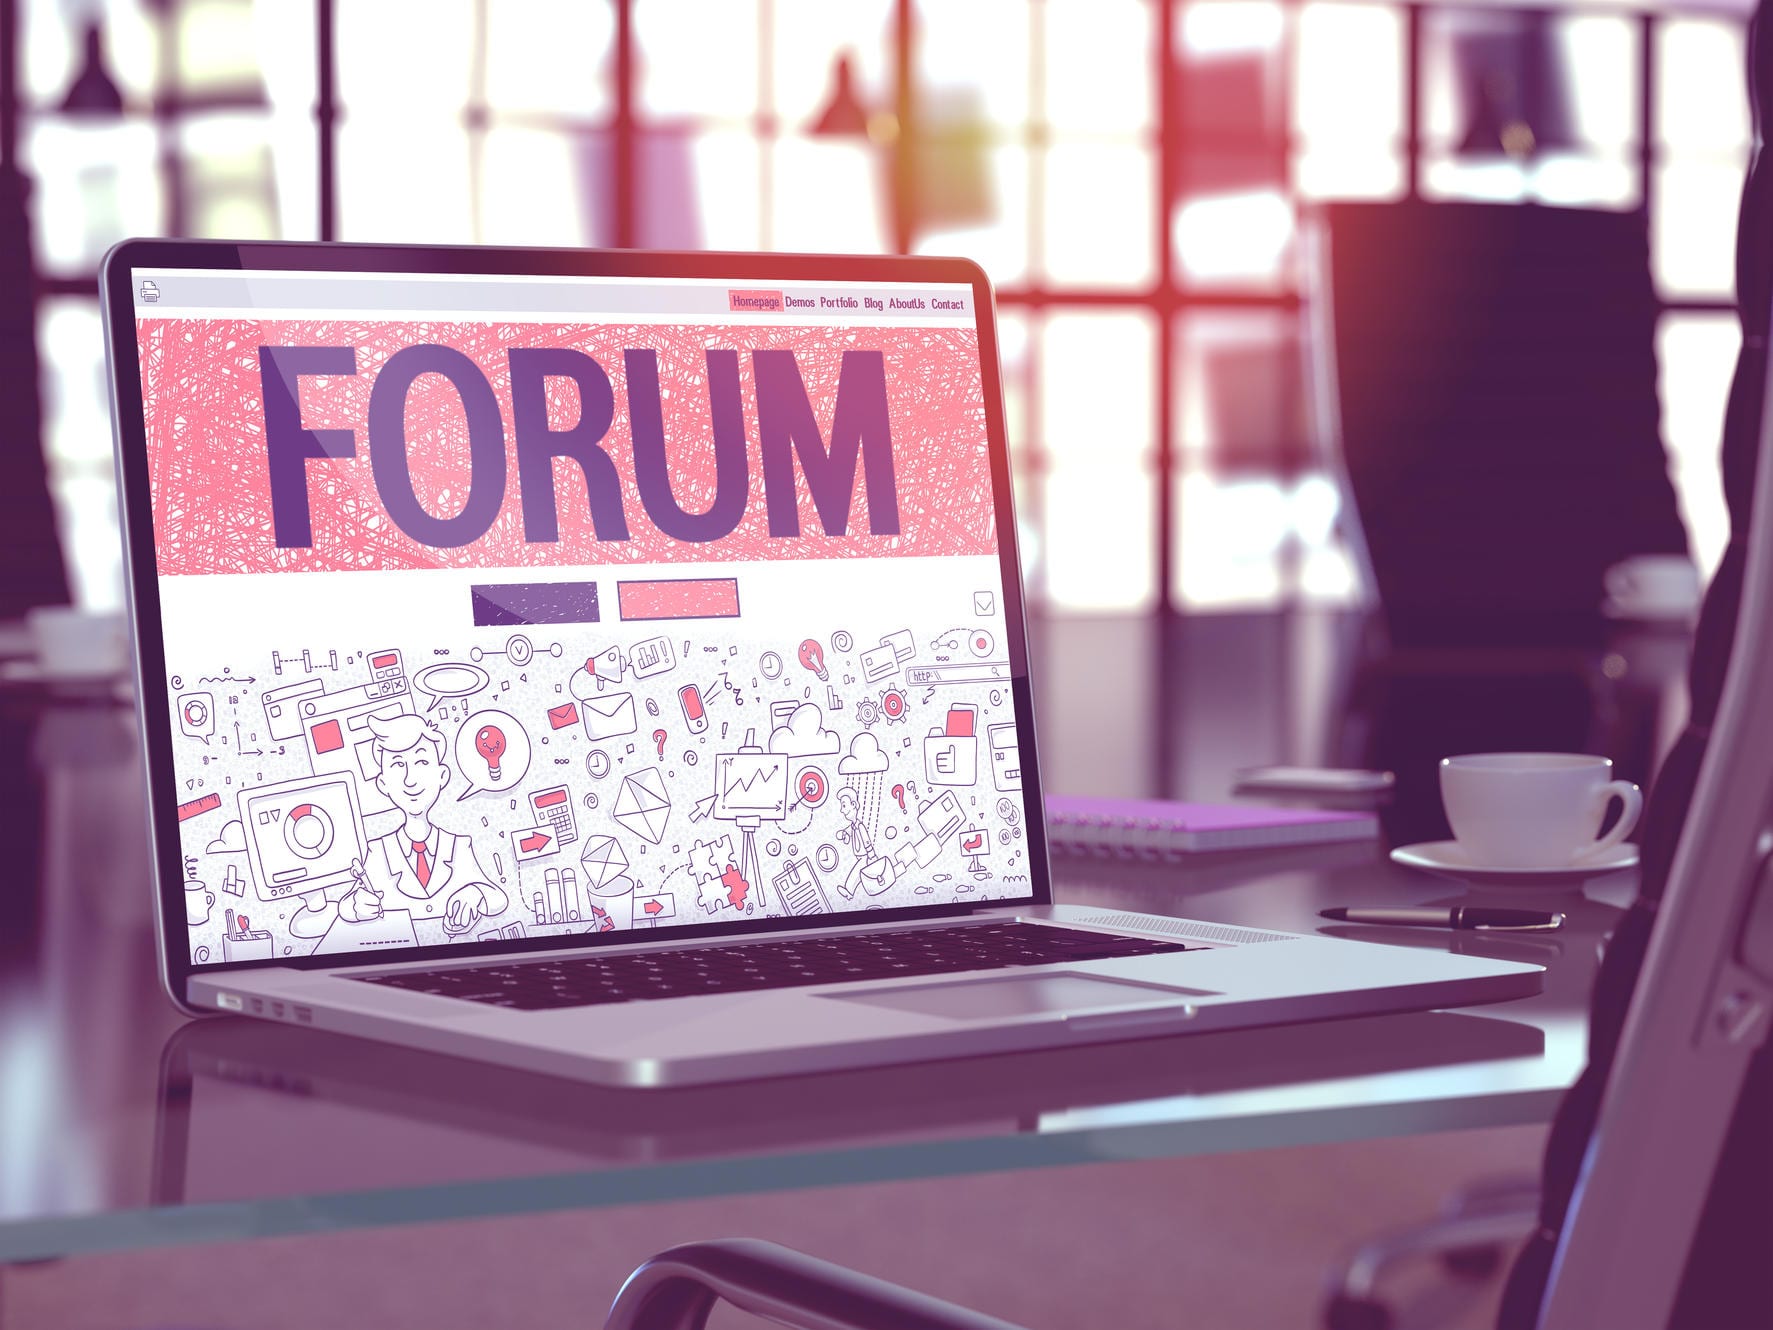 SEO Forums: Best 9 Sites to Share Knowledge About SEO